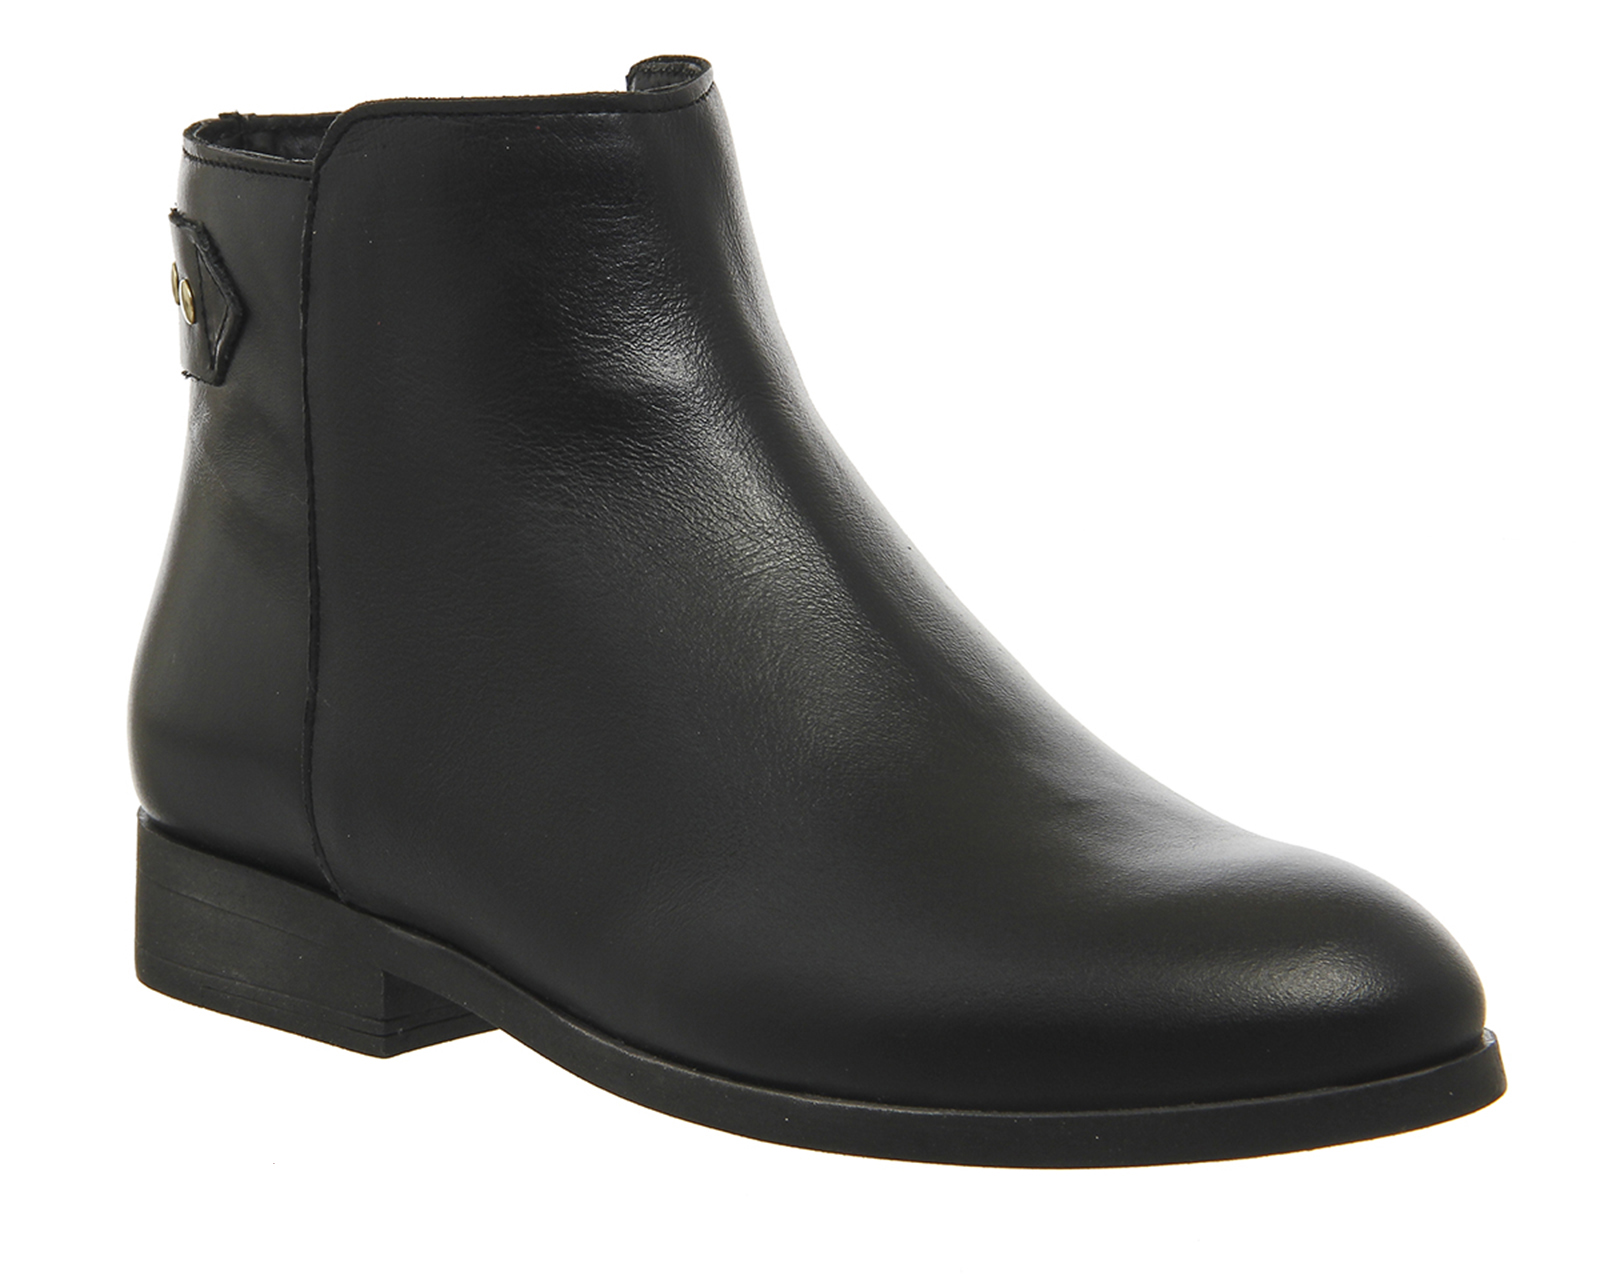 OFFICEIntro Back Strap BootsBlack Leather